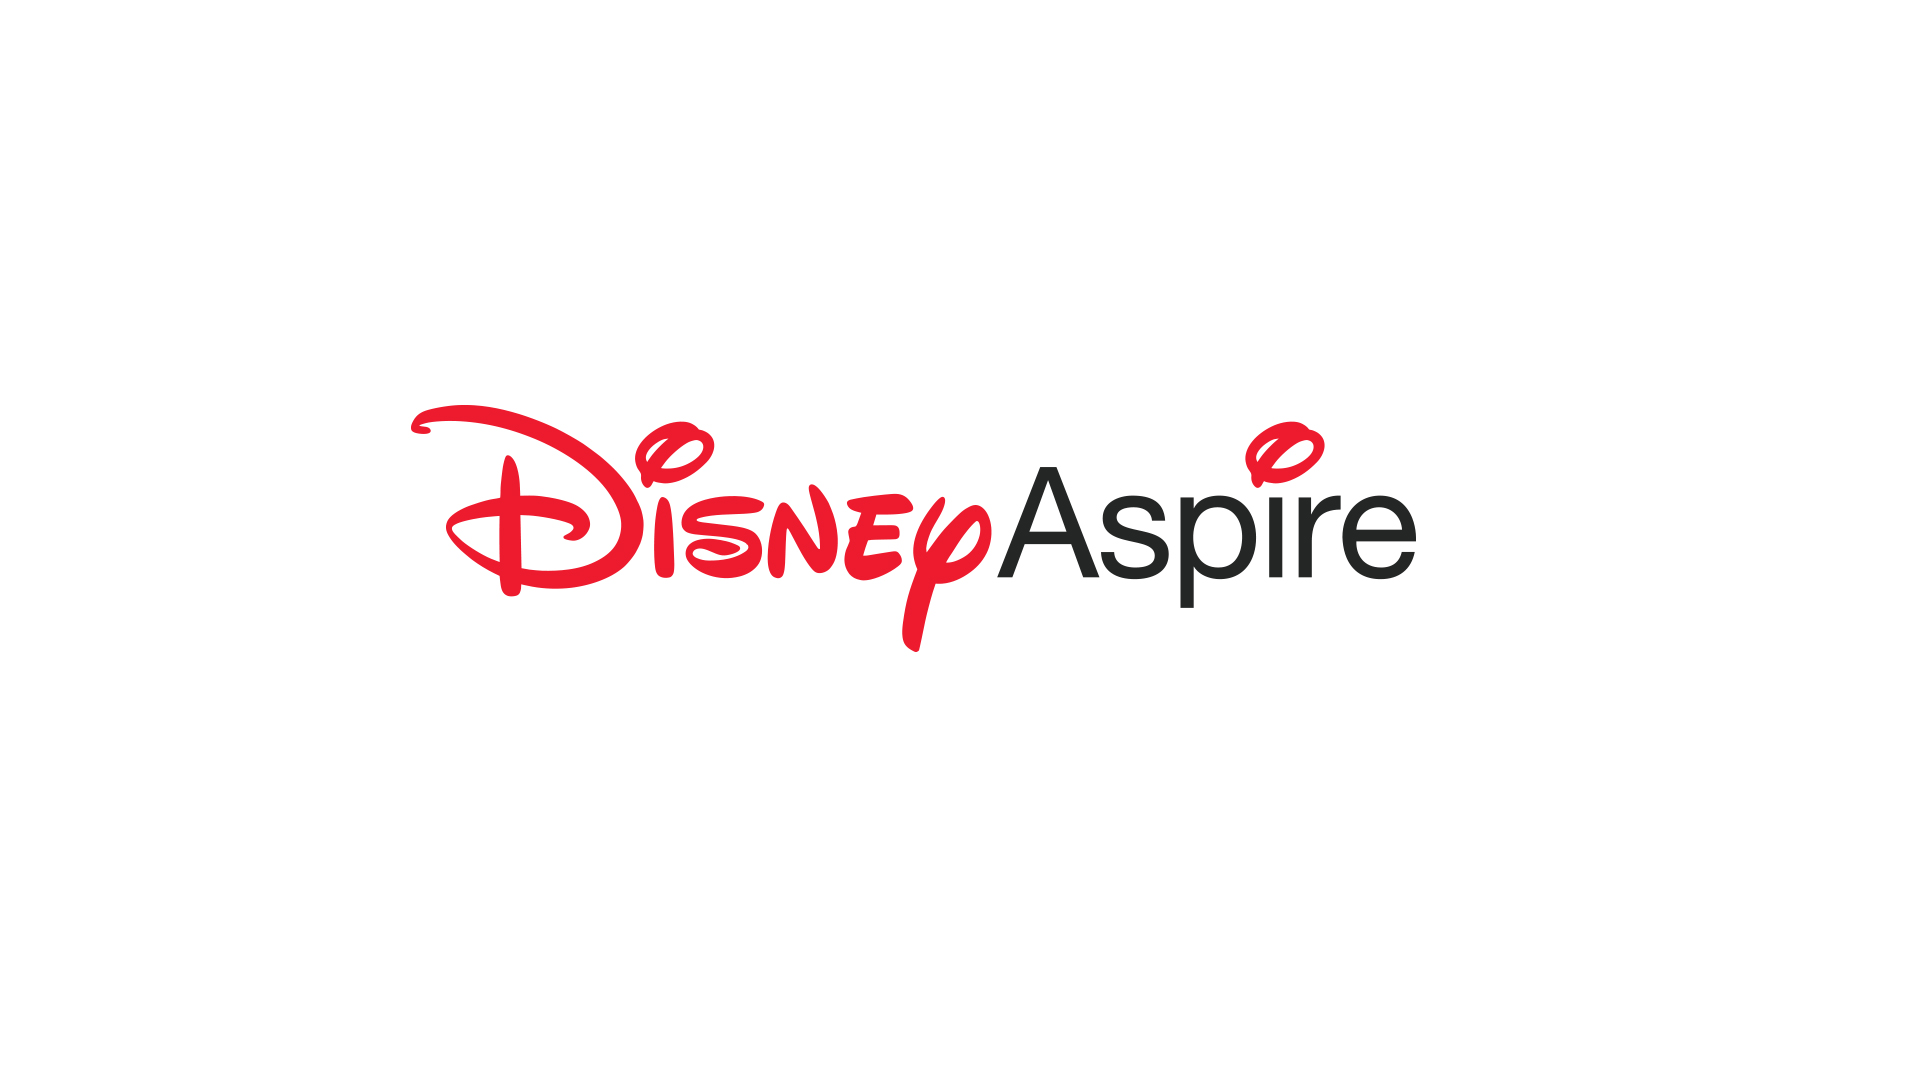 Disney Aspire Adds Purdue and Southern New Hampshire University to its Network of Educational Providers